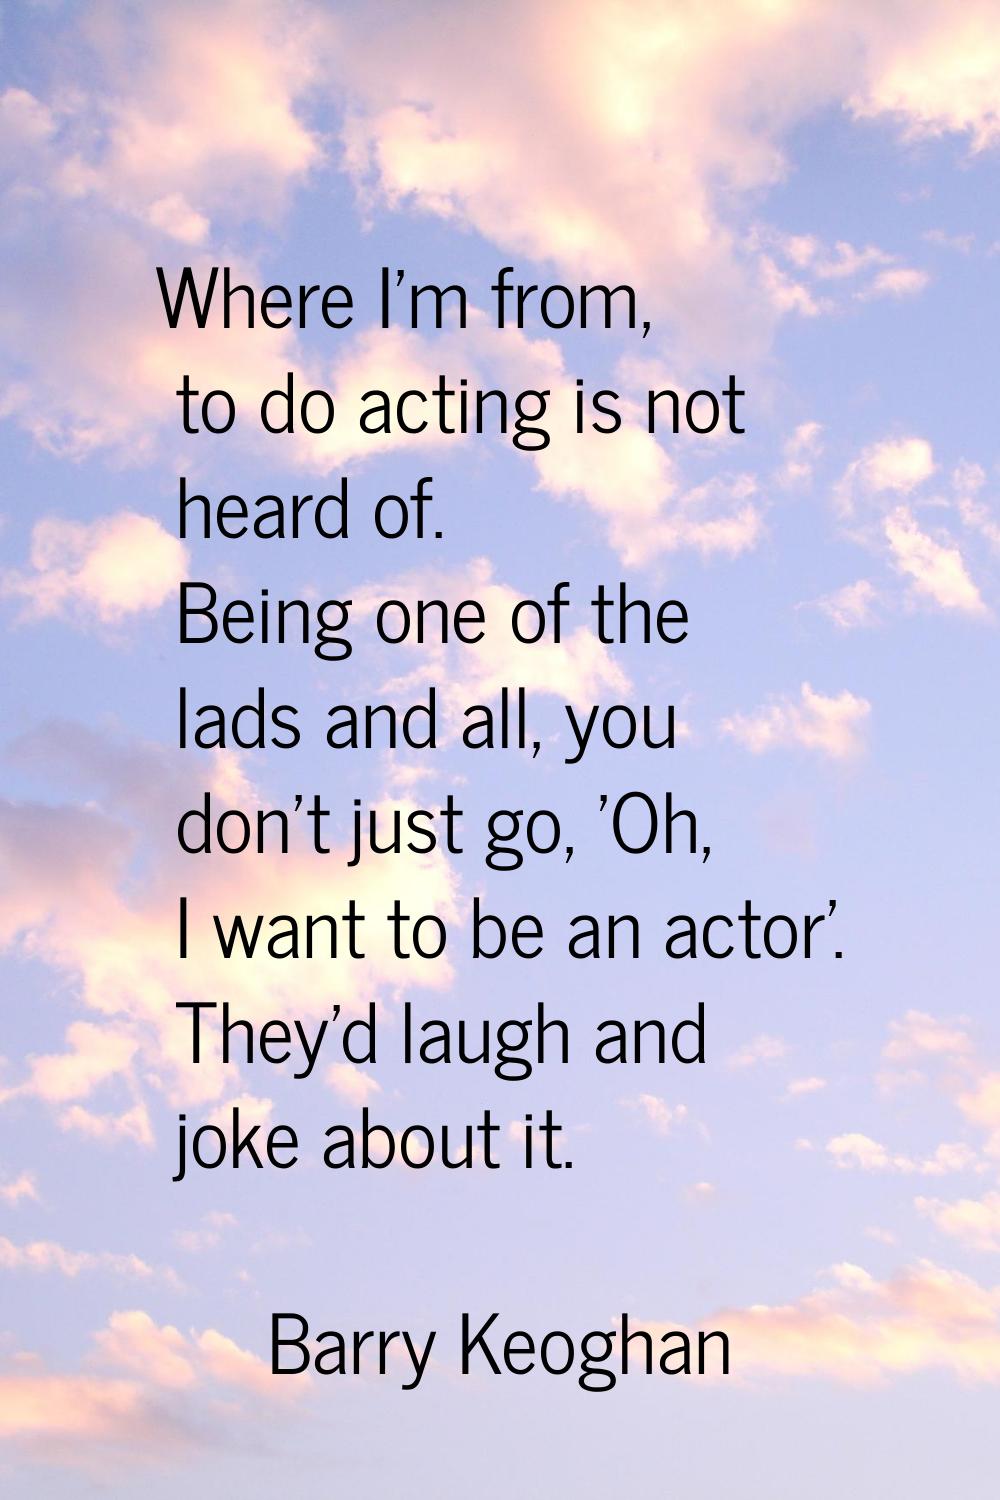 Where I'm from, to do acting is not heard of. Being one of the lads and all, you don't just go, 'Oh